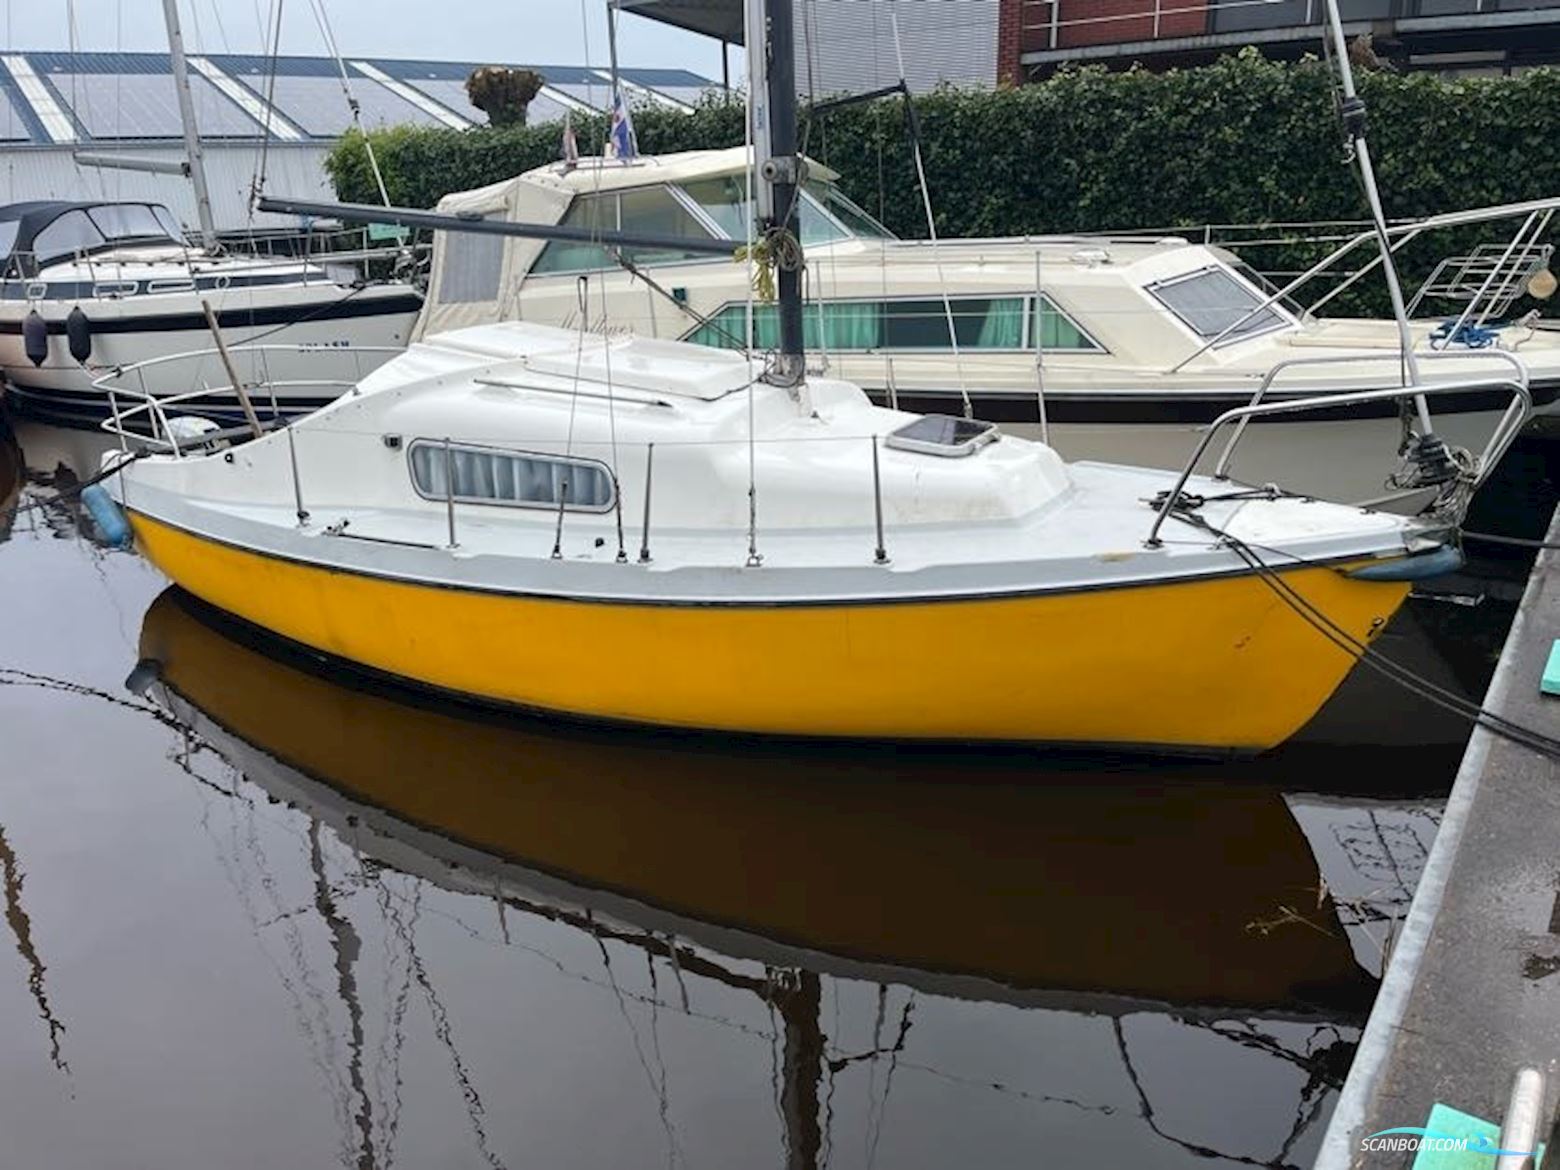 Compromis 7.20 Sailing boat 1975, with Honda engine, The Netherlands